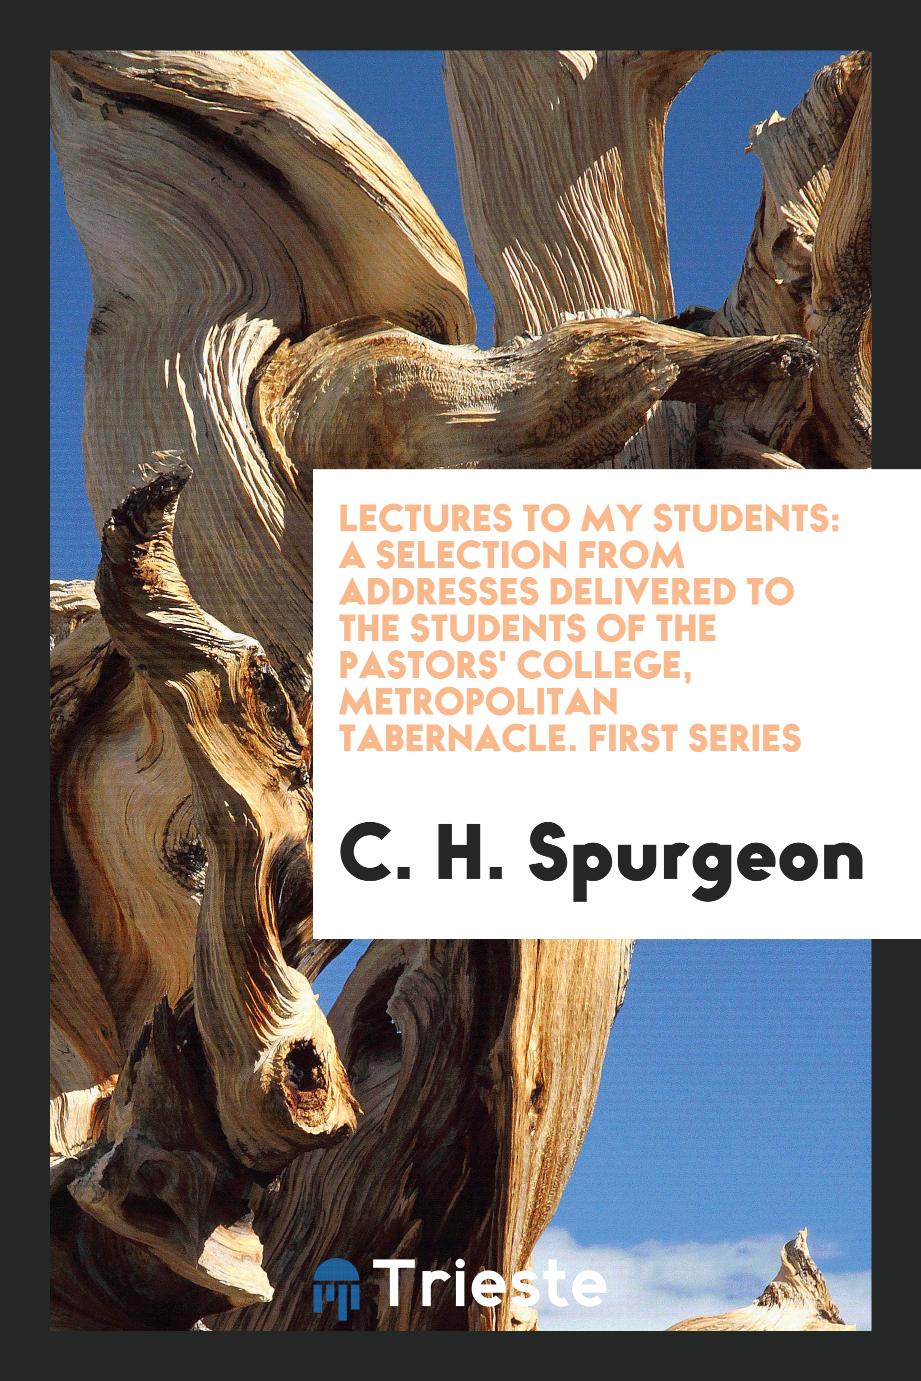 Lectures to My Students: A Selection from Addresses Delivered to the Students of the Pastors' College, Metropolitan Tabernacle. First Series